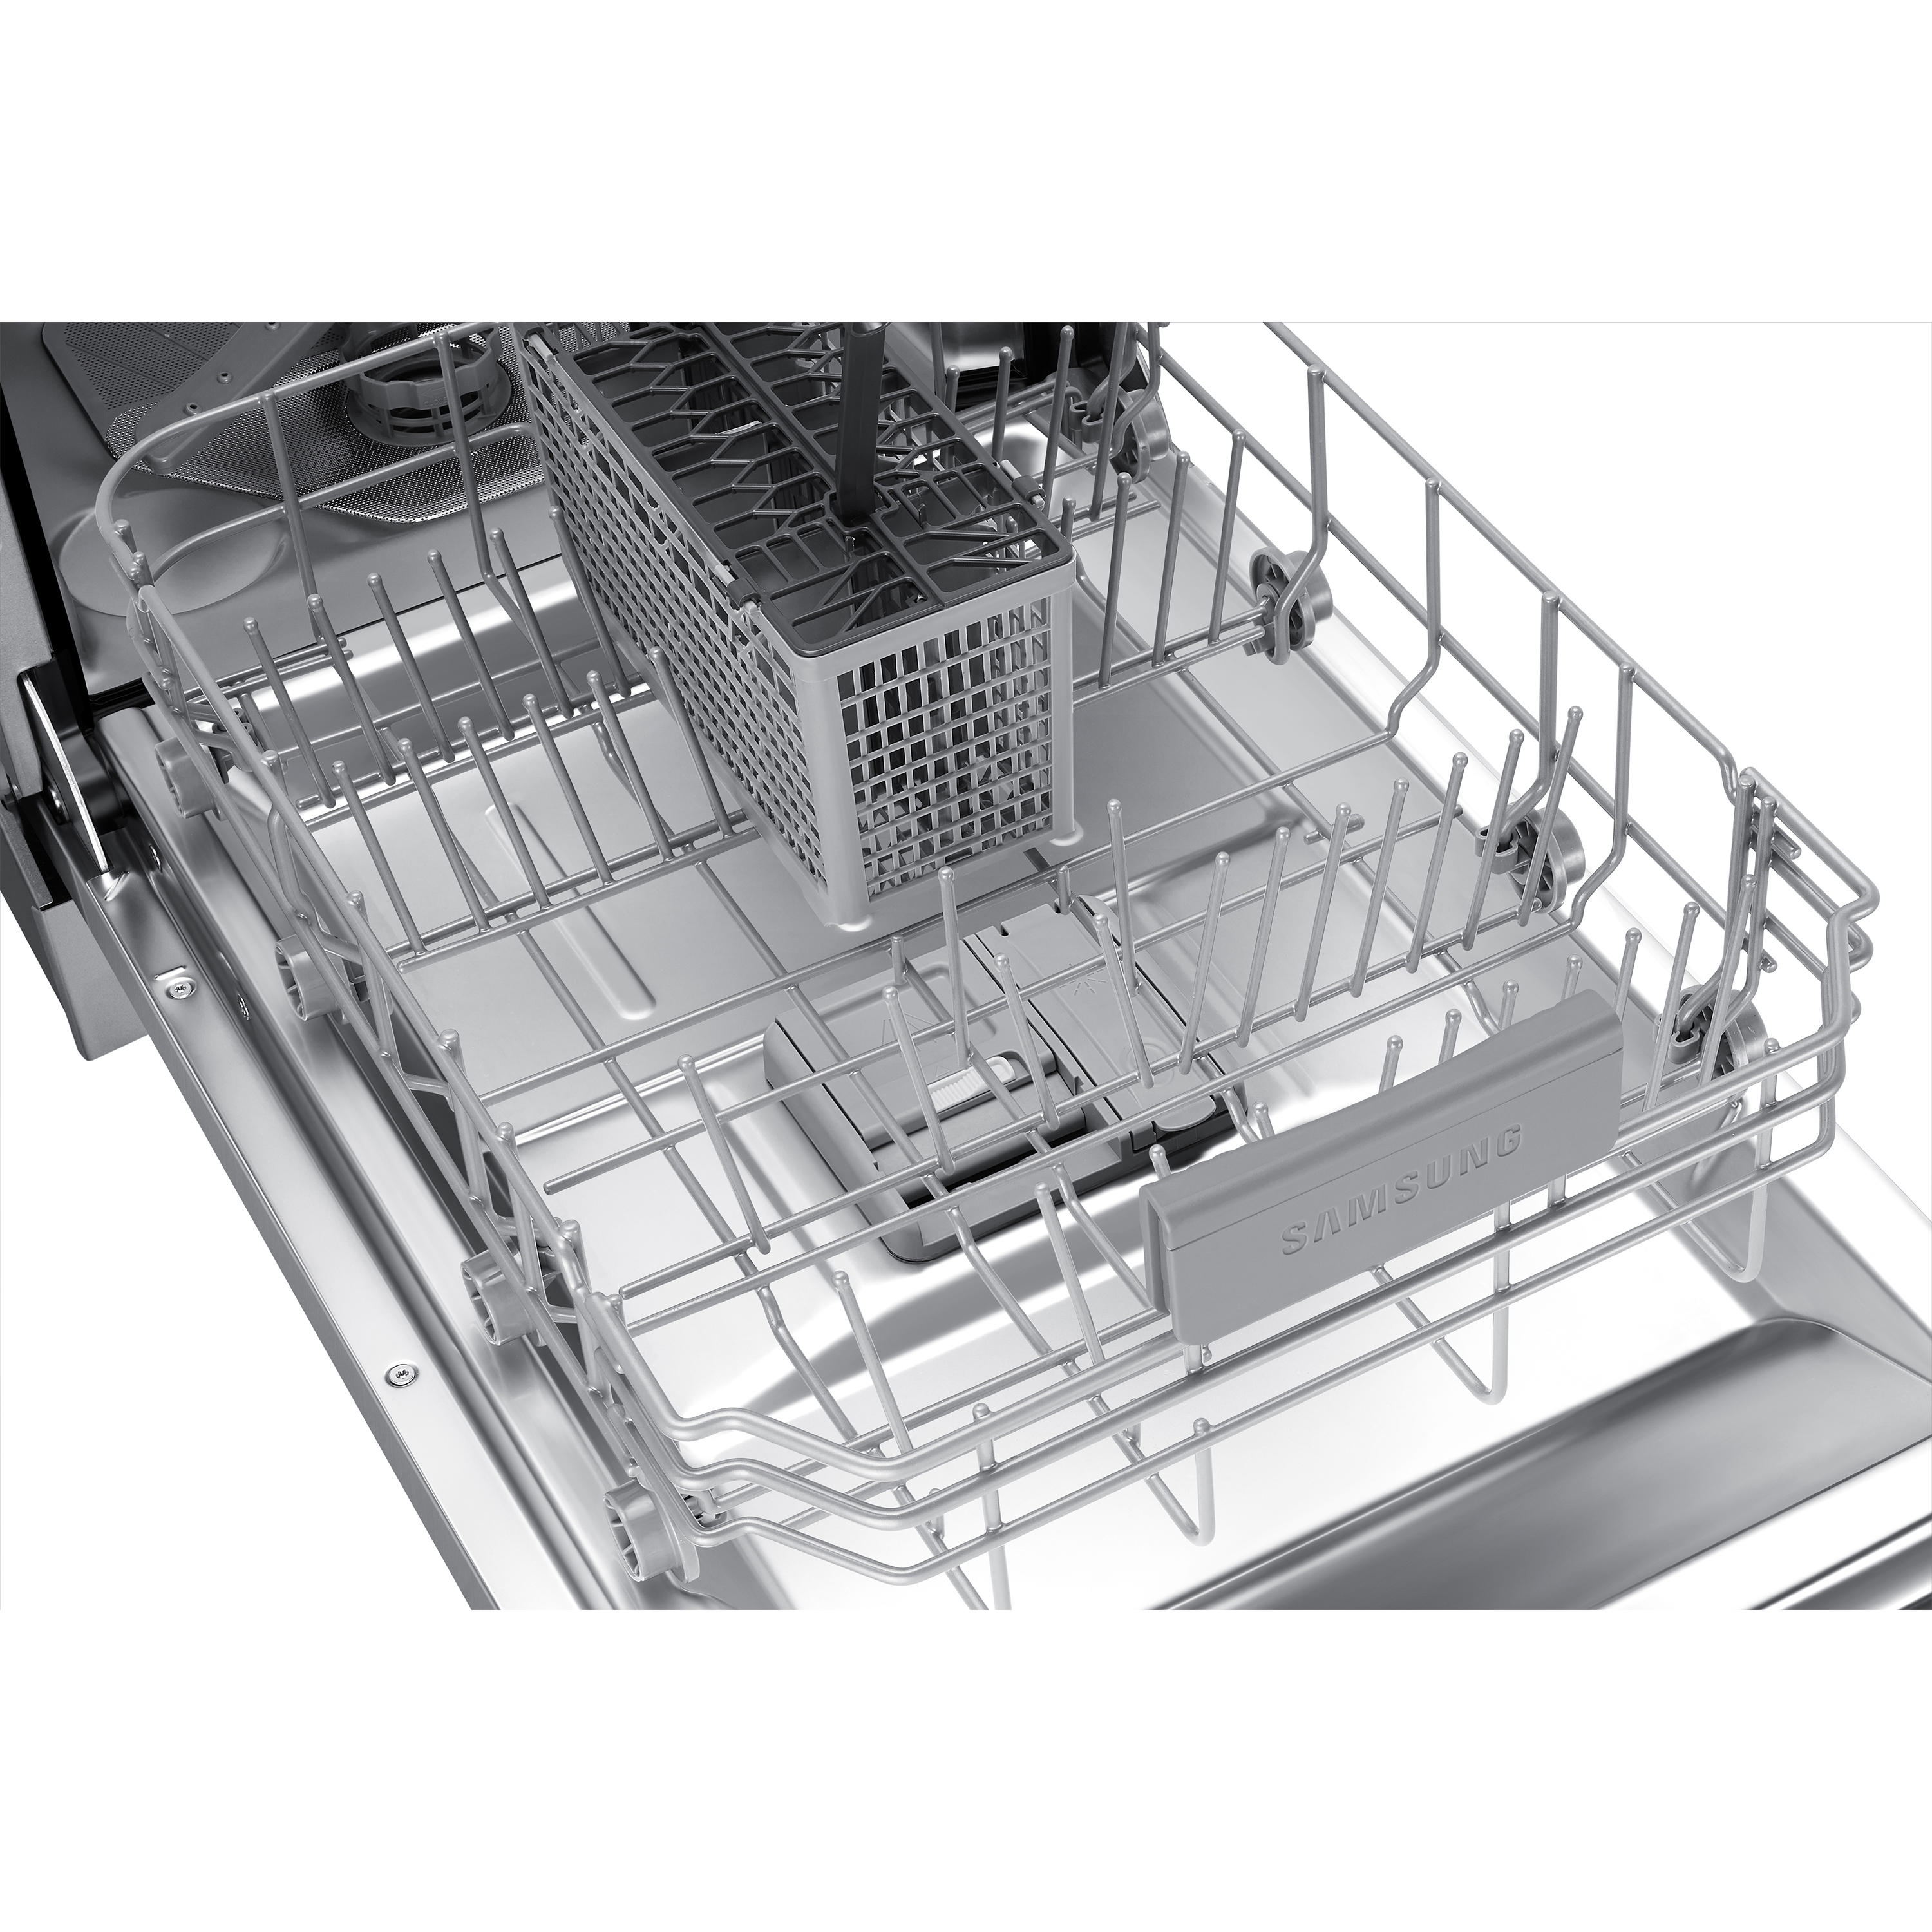 Thumbnail image of Whisper Quiet 46 dBA Dishwasher in Stainless Steel